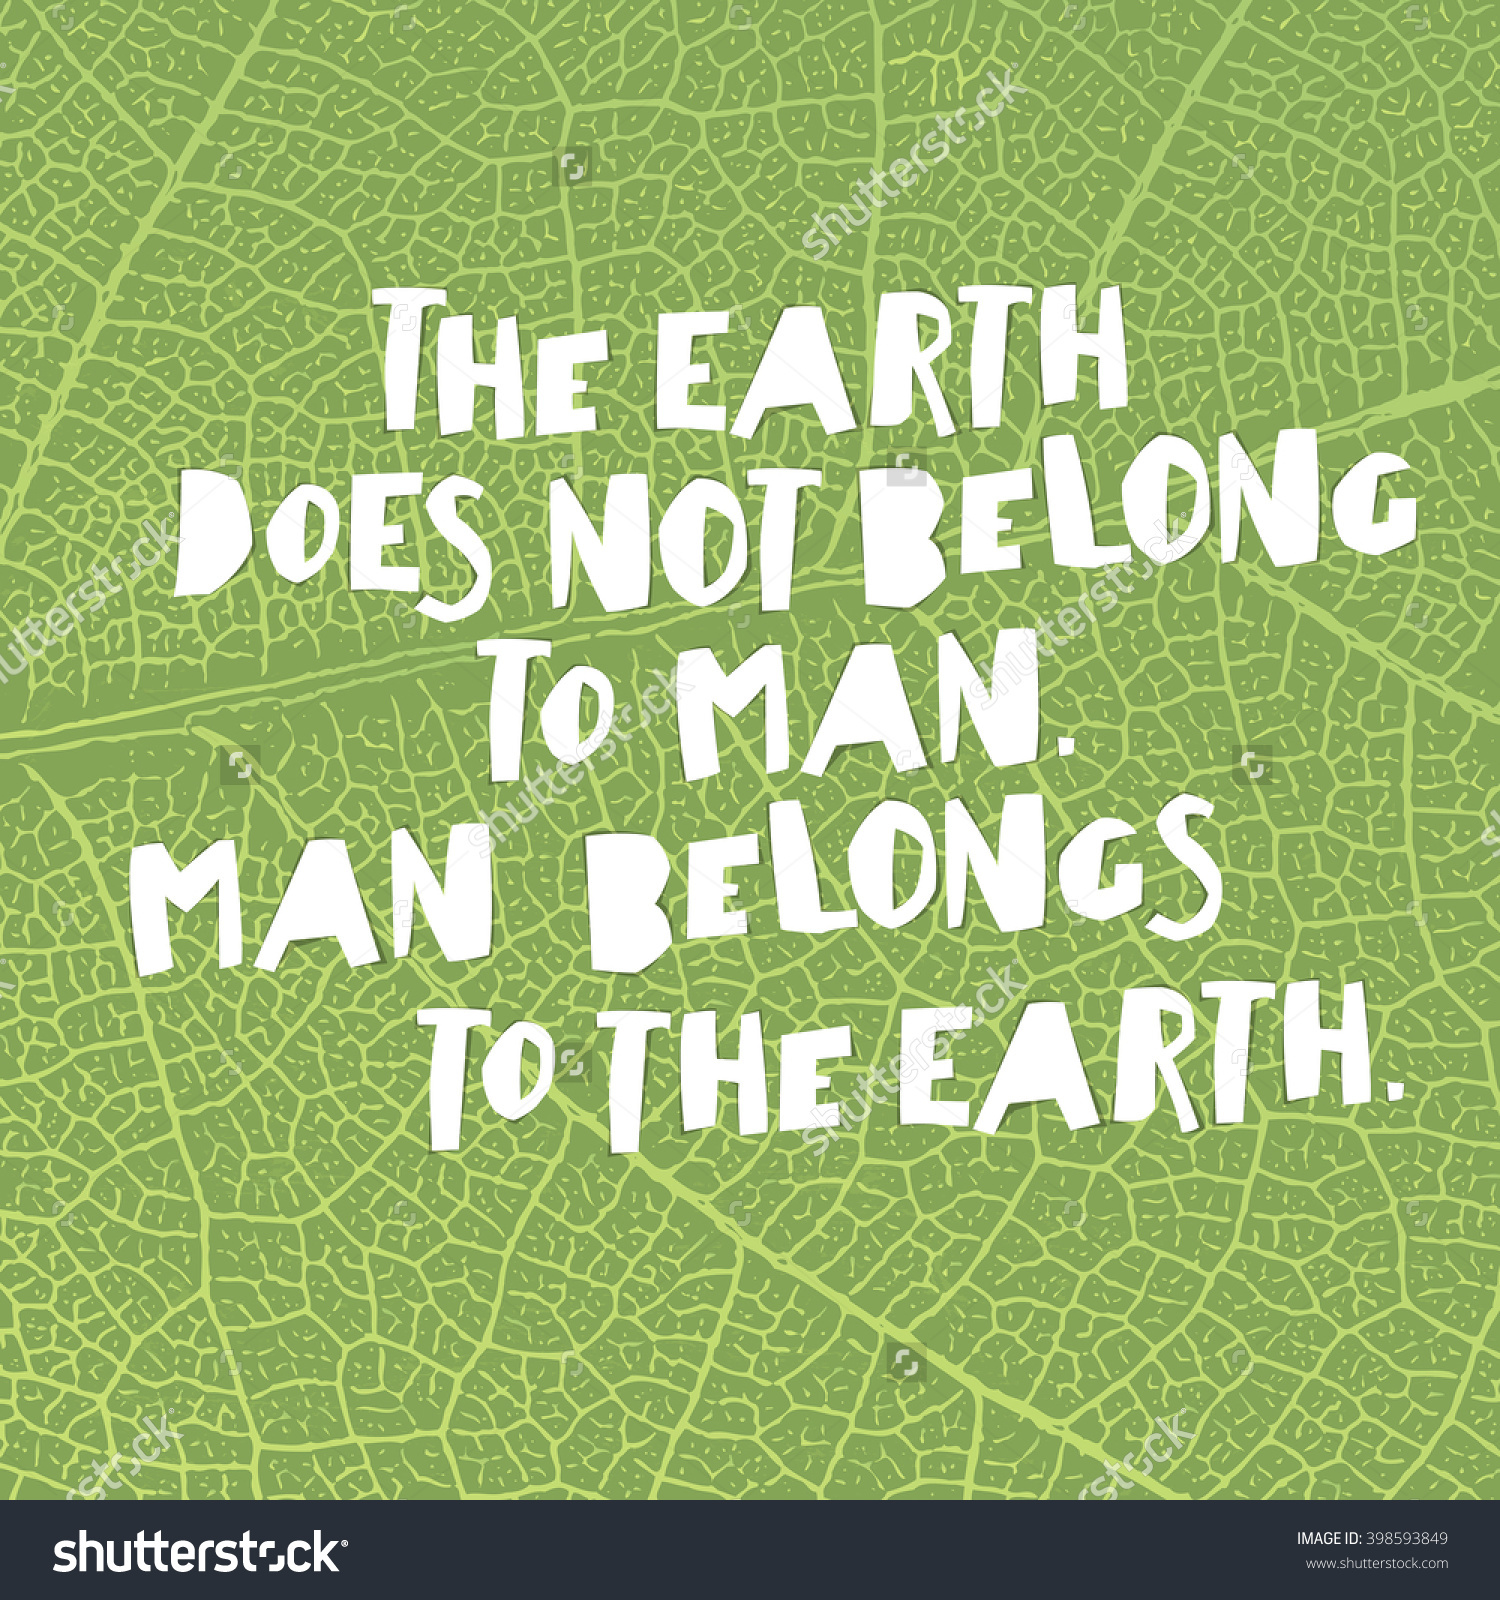 The earth does not belong to man. Man belongs to the earth.